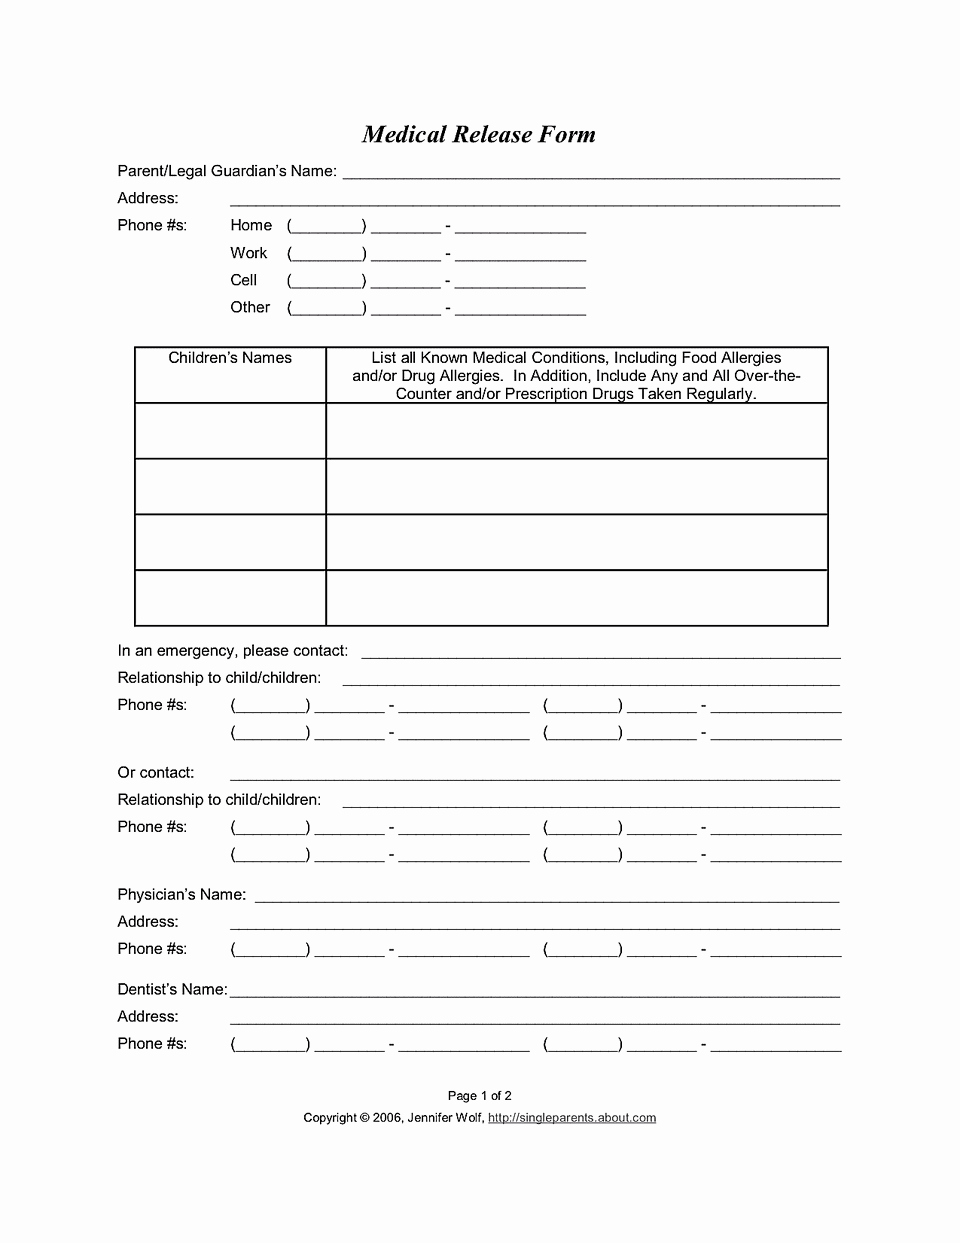 Medical Release form for Consent to Treat Your Kids